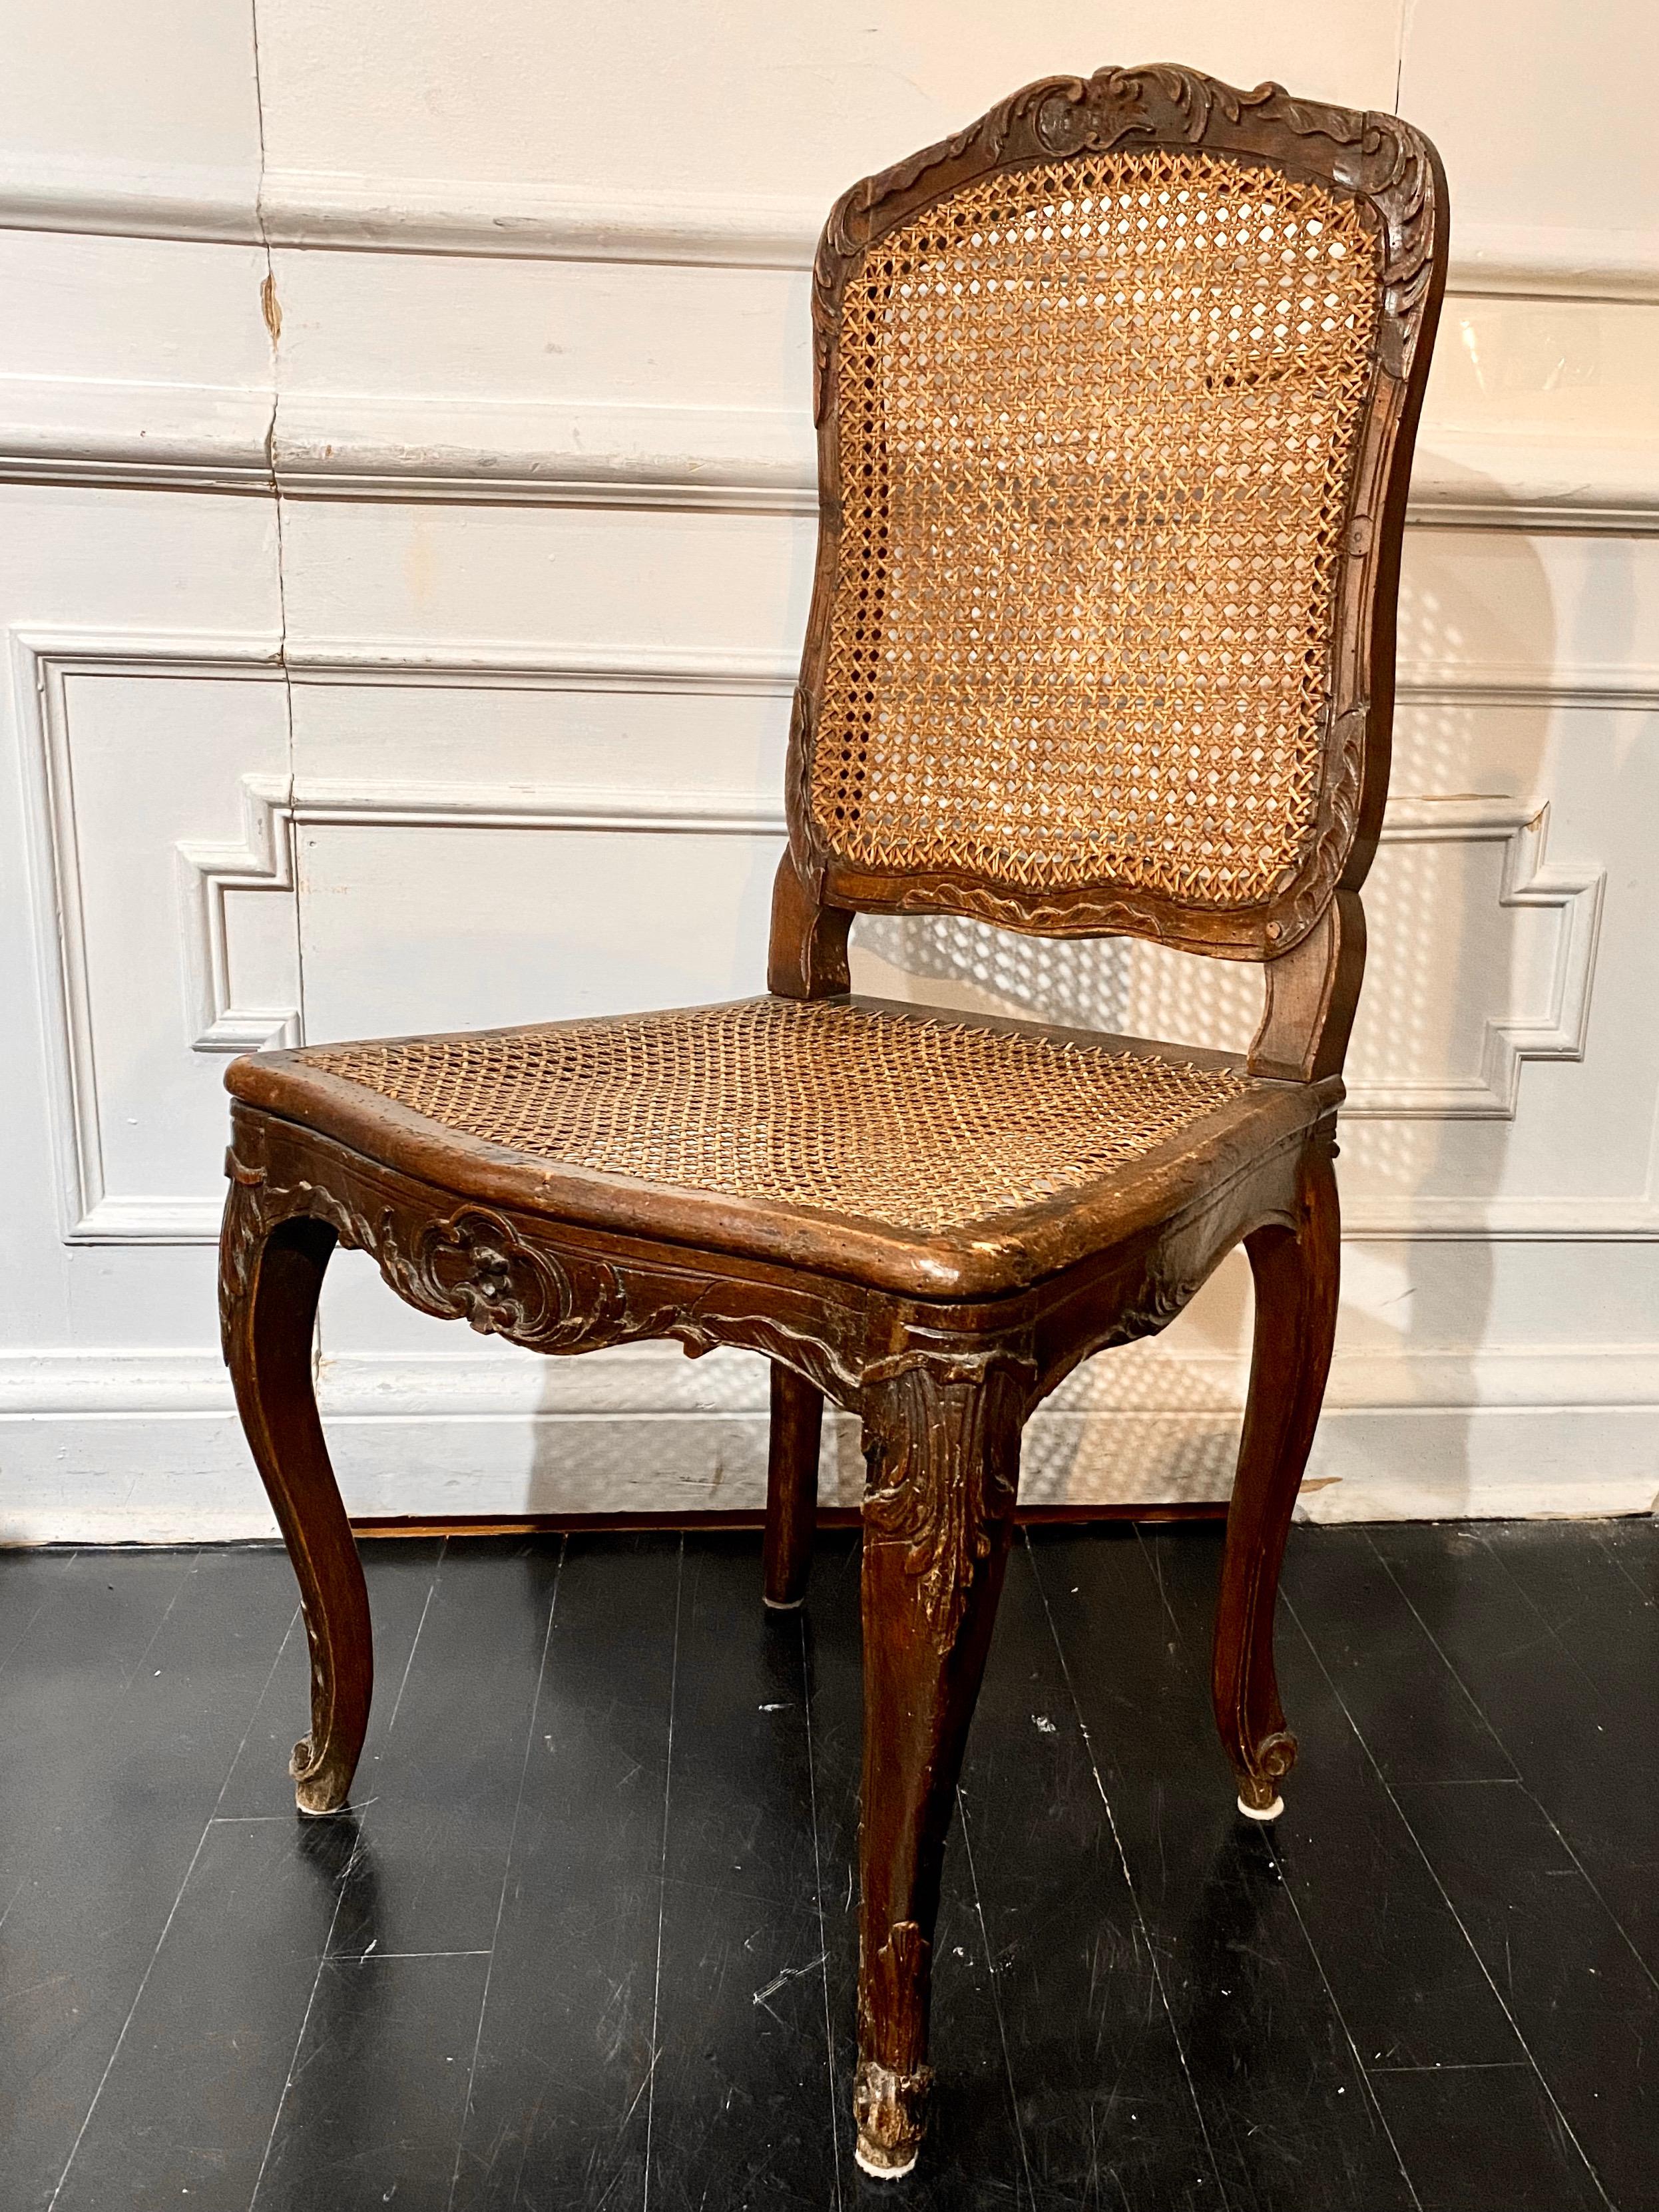 Wood French, Louis XV Régence Caned Chairs, 18th Century, Two Similar For Sale